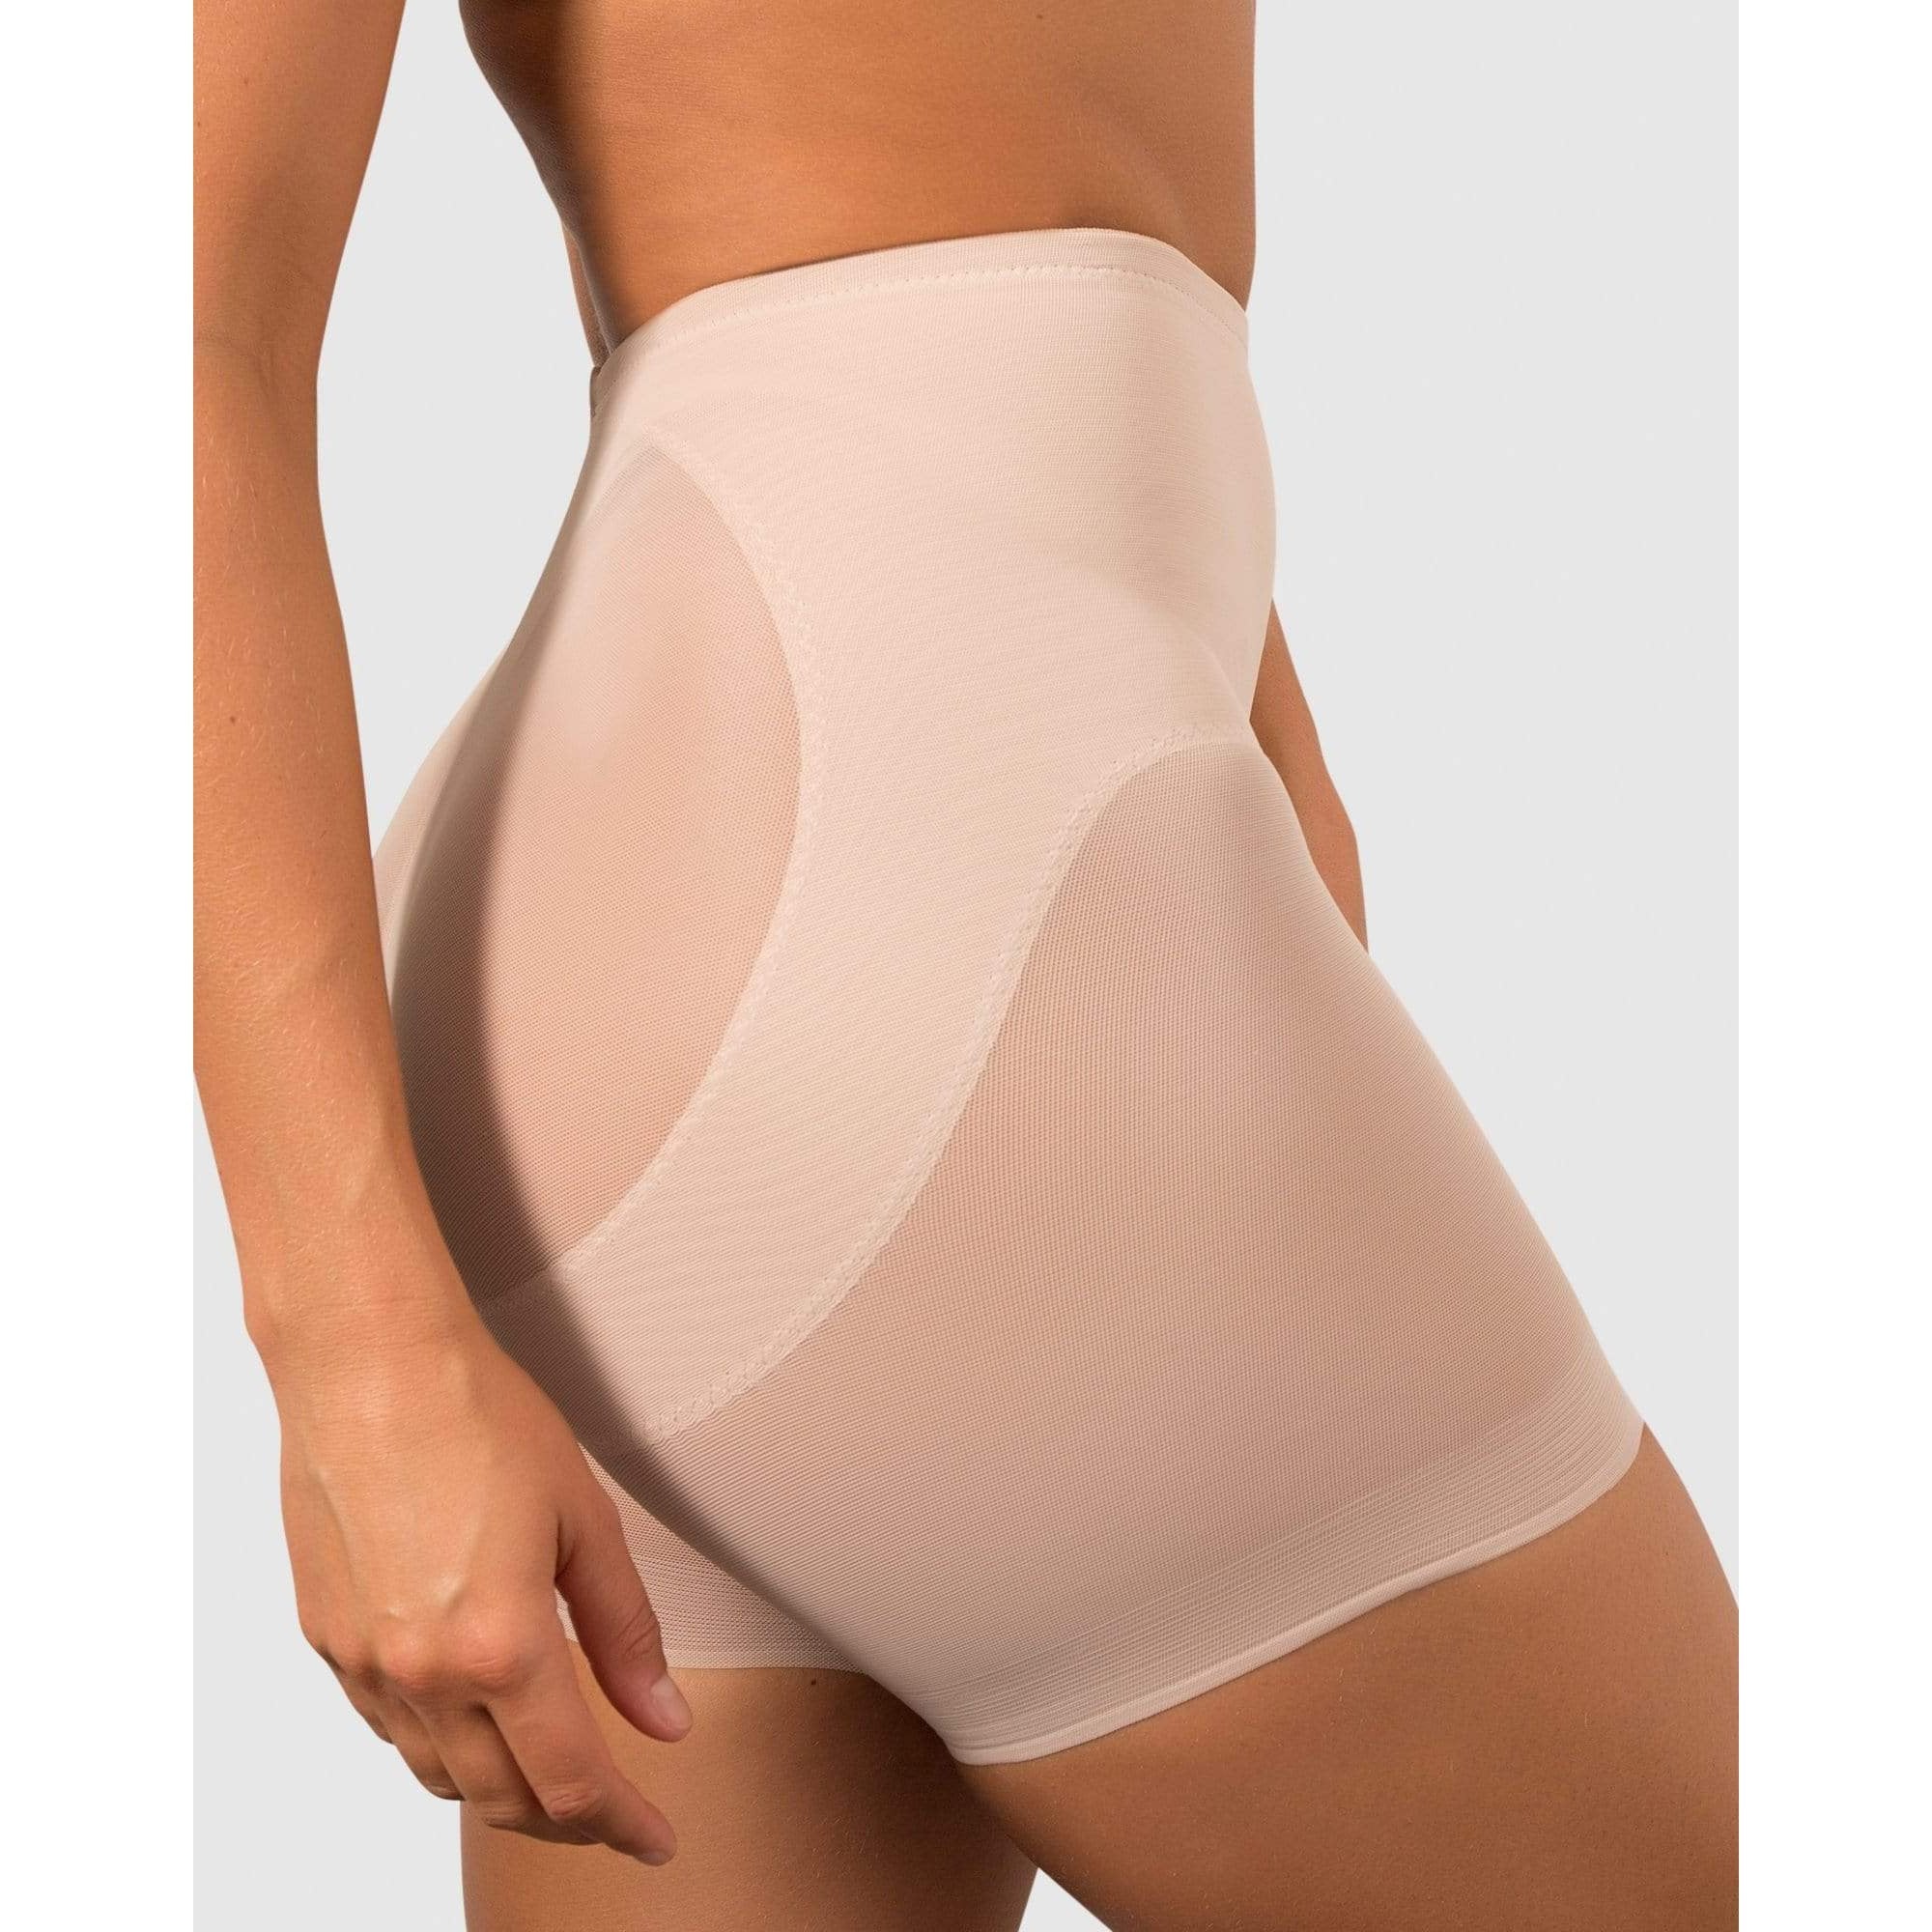 Miraclesuit Shapewear 10 / S / Nude Rear Lifting Boy Short from Illusions Lingerie in Melbourne